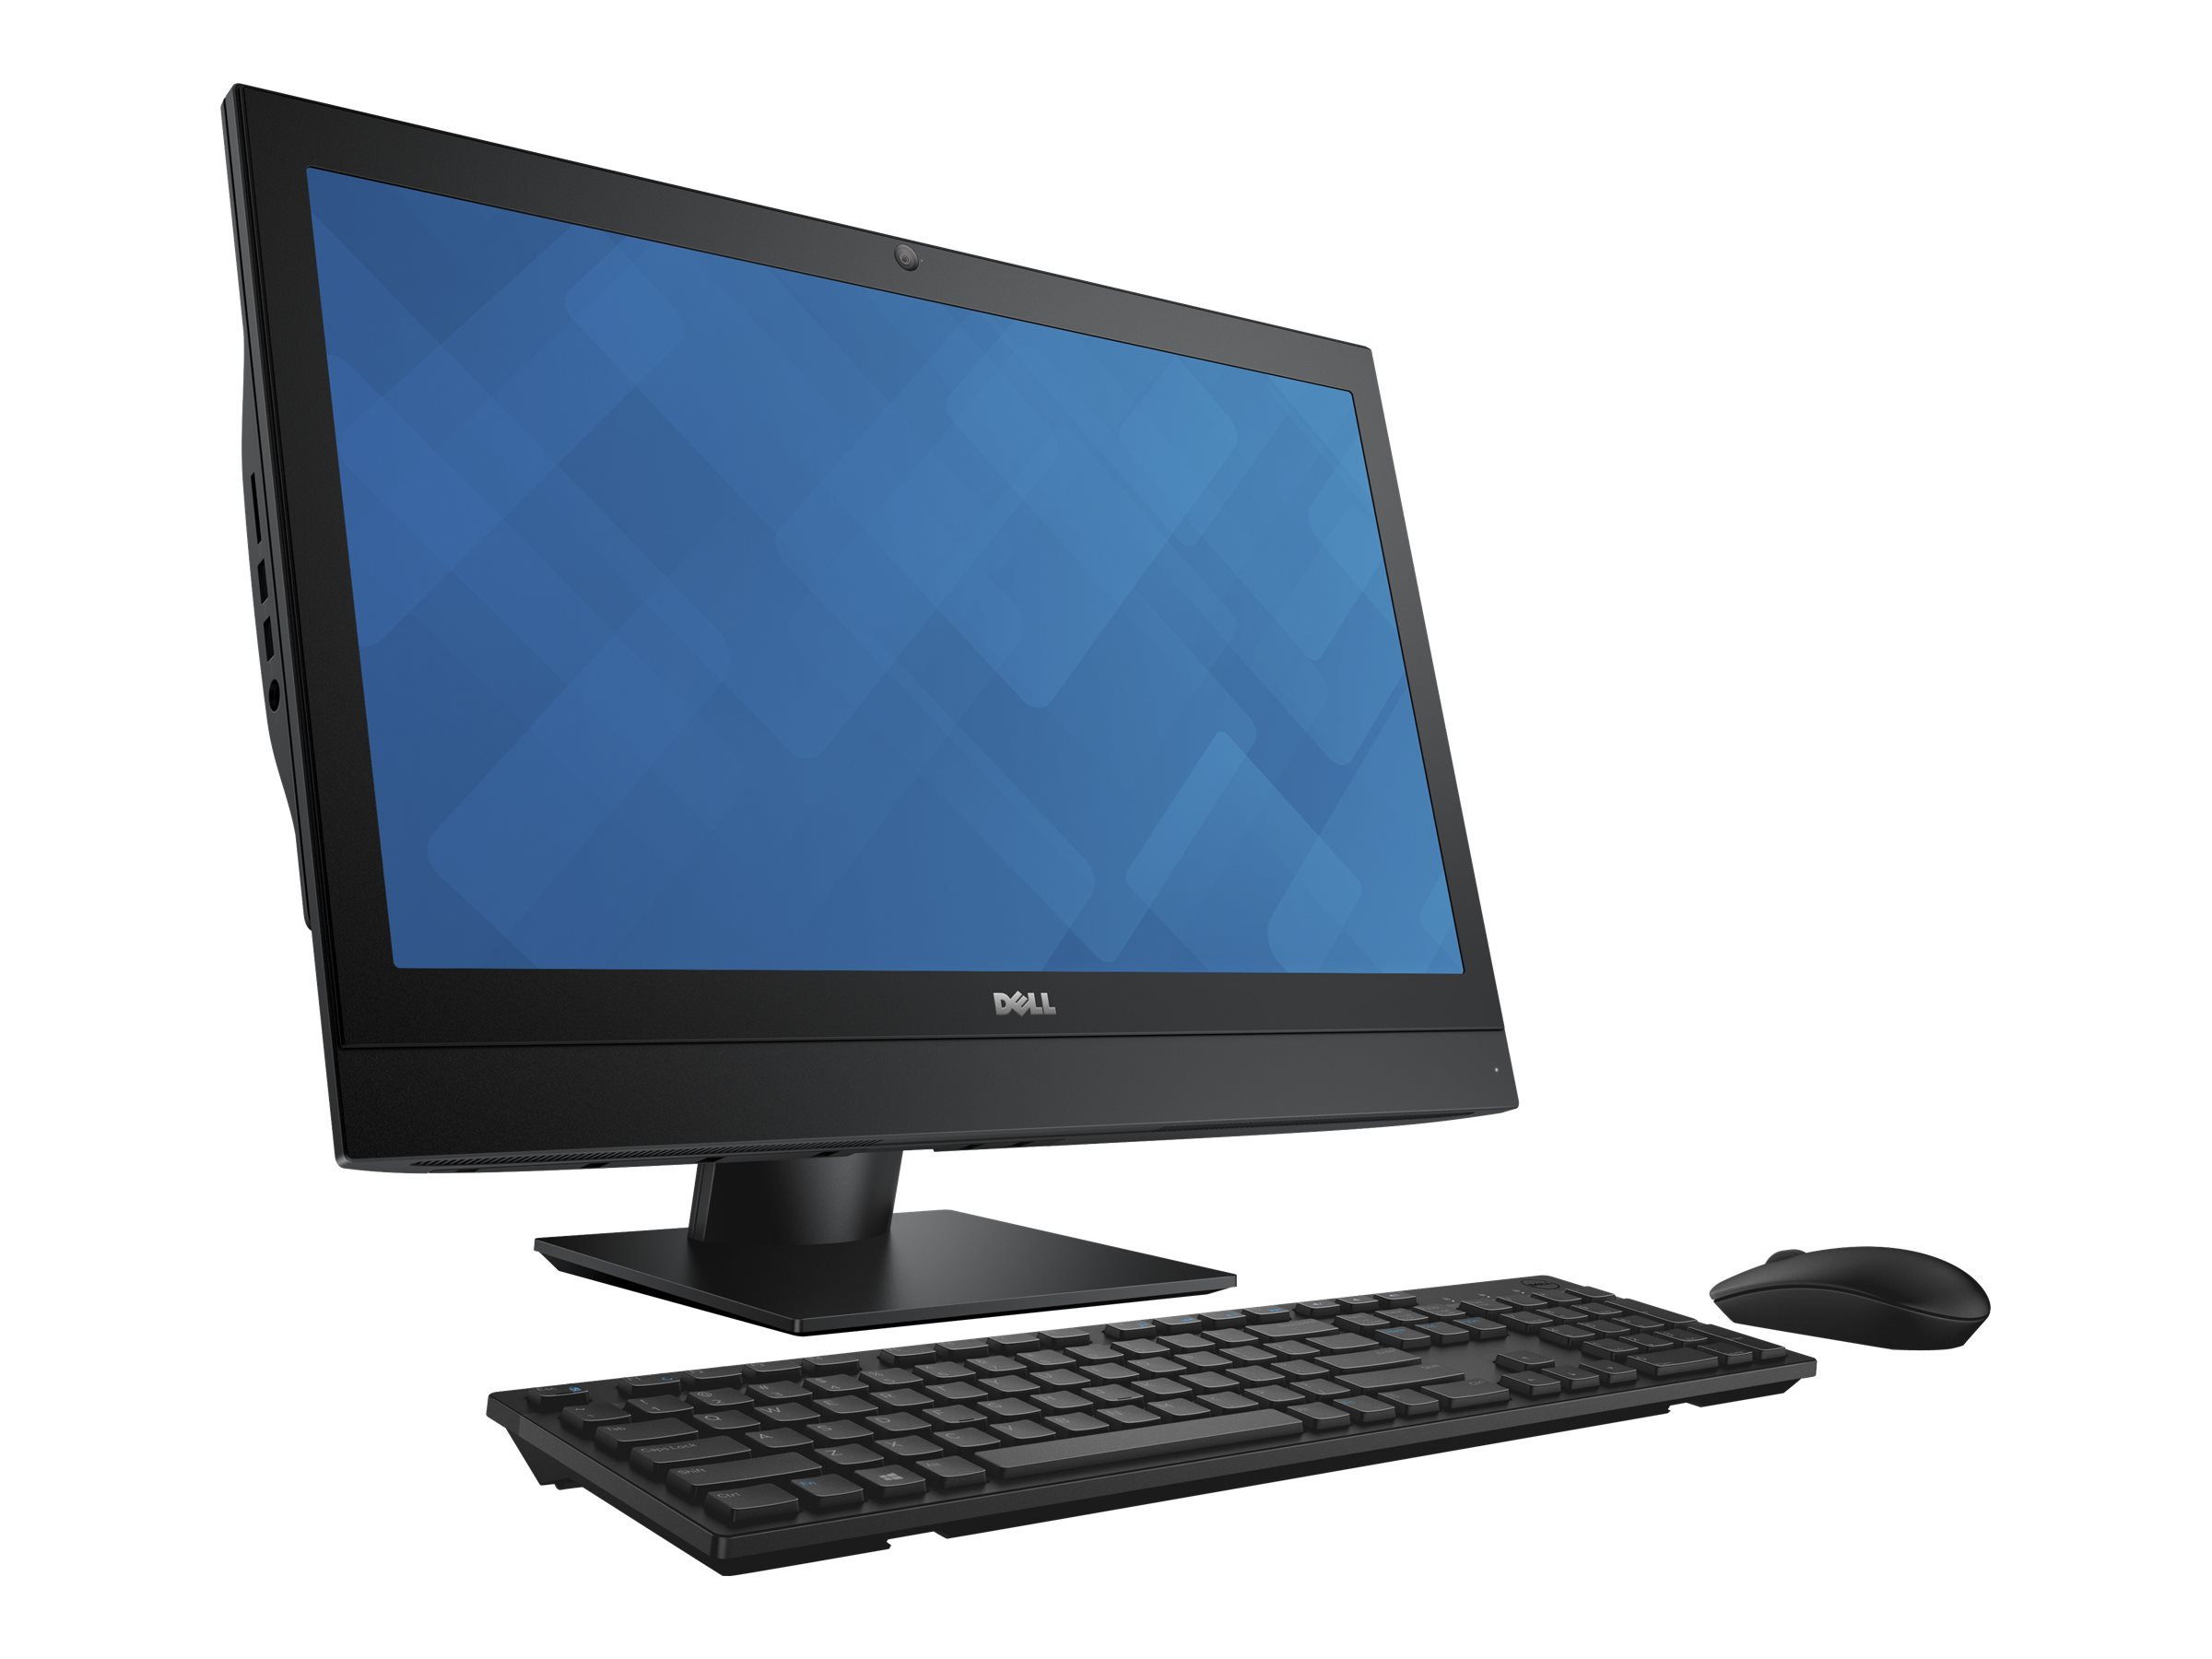 Dell OptiPlex 7440 - All-in-one - Core i5 6500 / 3.2 GHz - vPro - RAM 8 GB - HDD 500 GB - DVD-Writer - HD Graphics 530 - GigE - WLAN: 802.11a/b/g/n/ac, Bluetooth 4.1 - Win 7 Pro 64-bit (includes Win 10 Pro 64-bit License) - monitor: LED 23" 1920 x 1080 (Full HD) - keyboard: English - with 3 Years Hardware Service with Onsite/In-Home Service After Remote Diagnosis - image 2 of 8